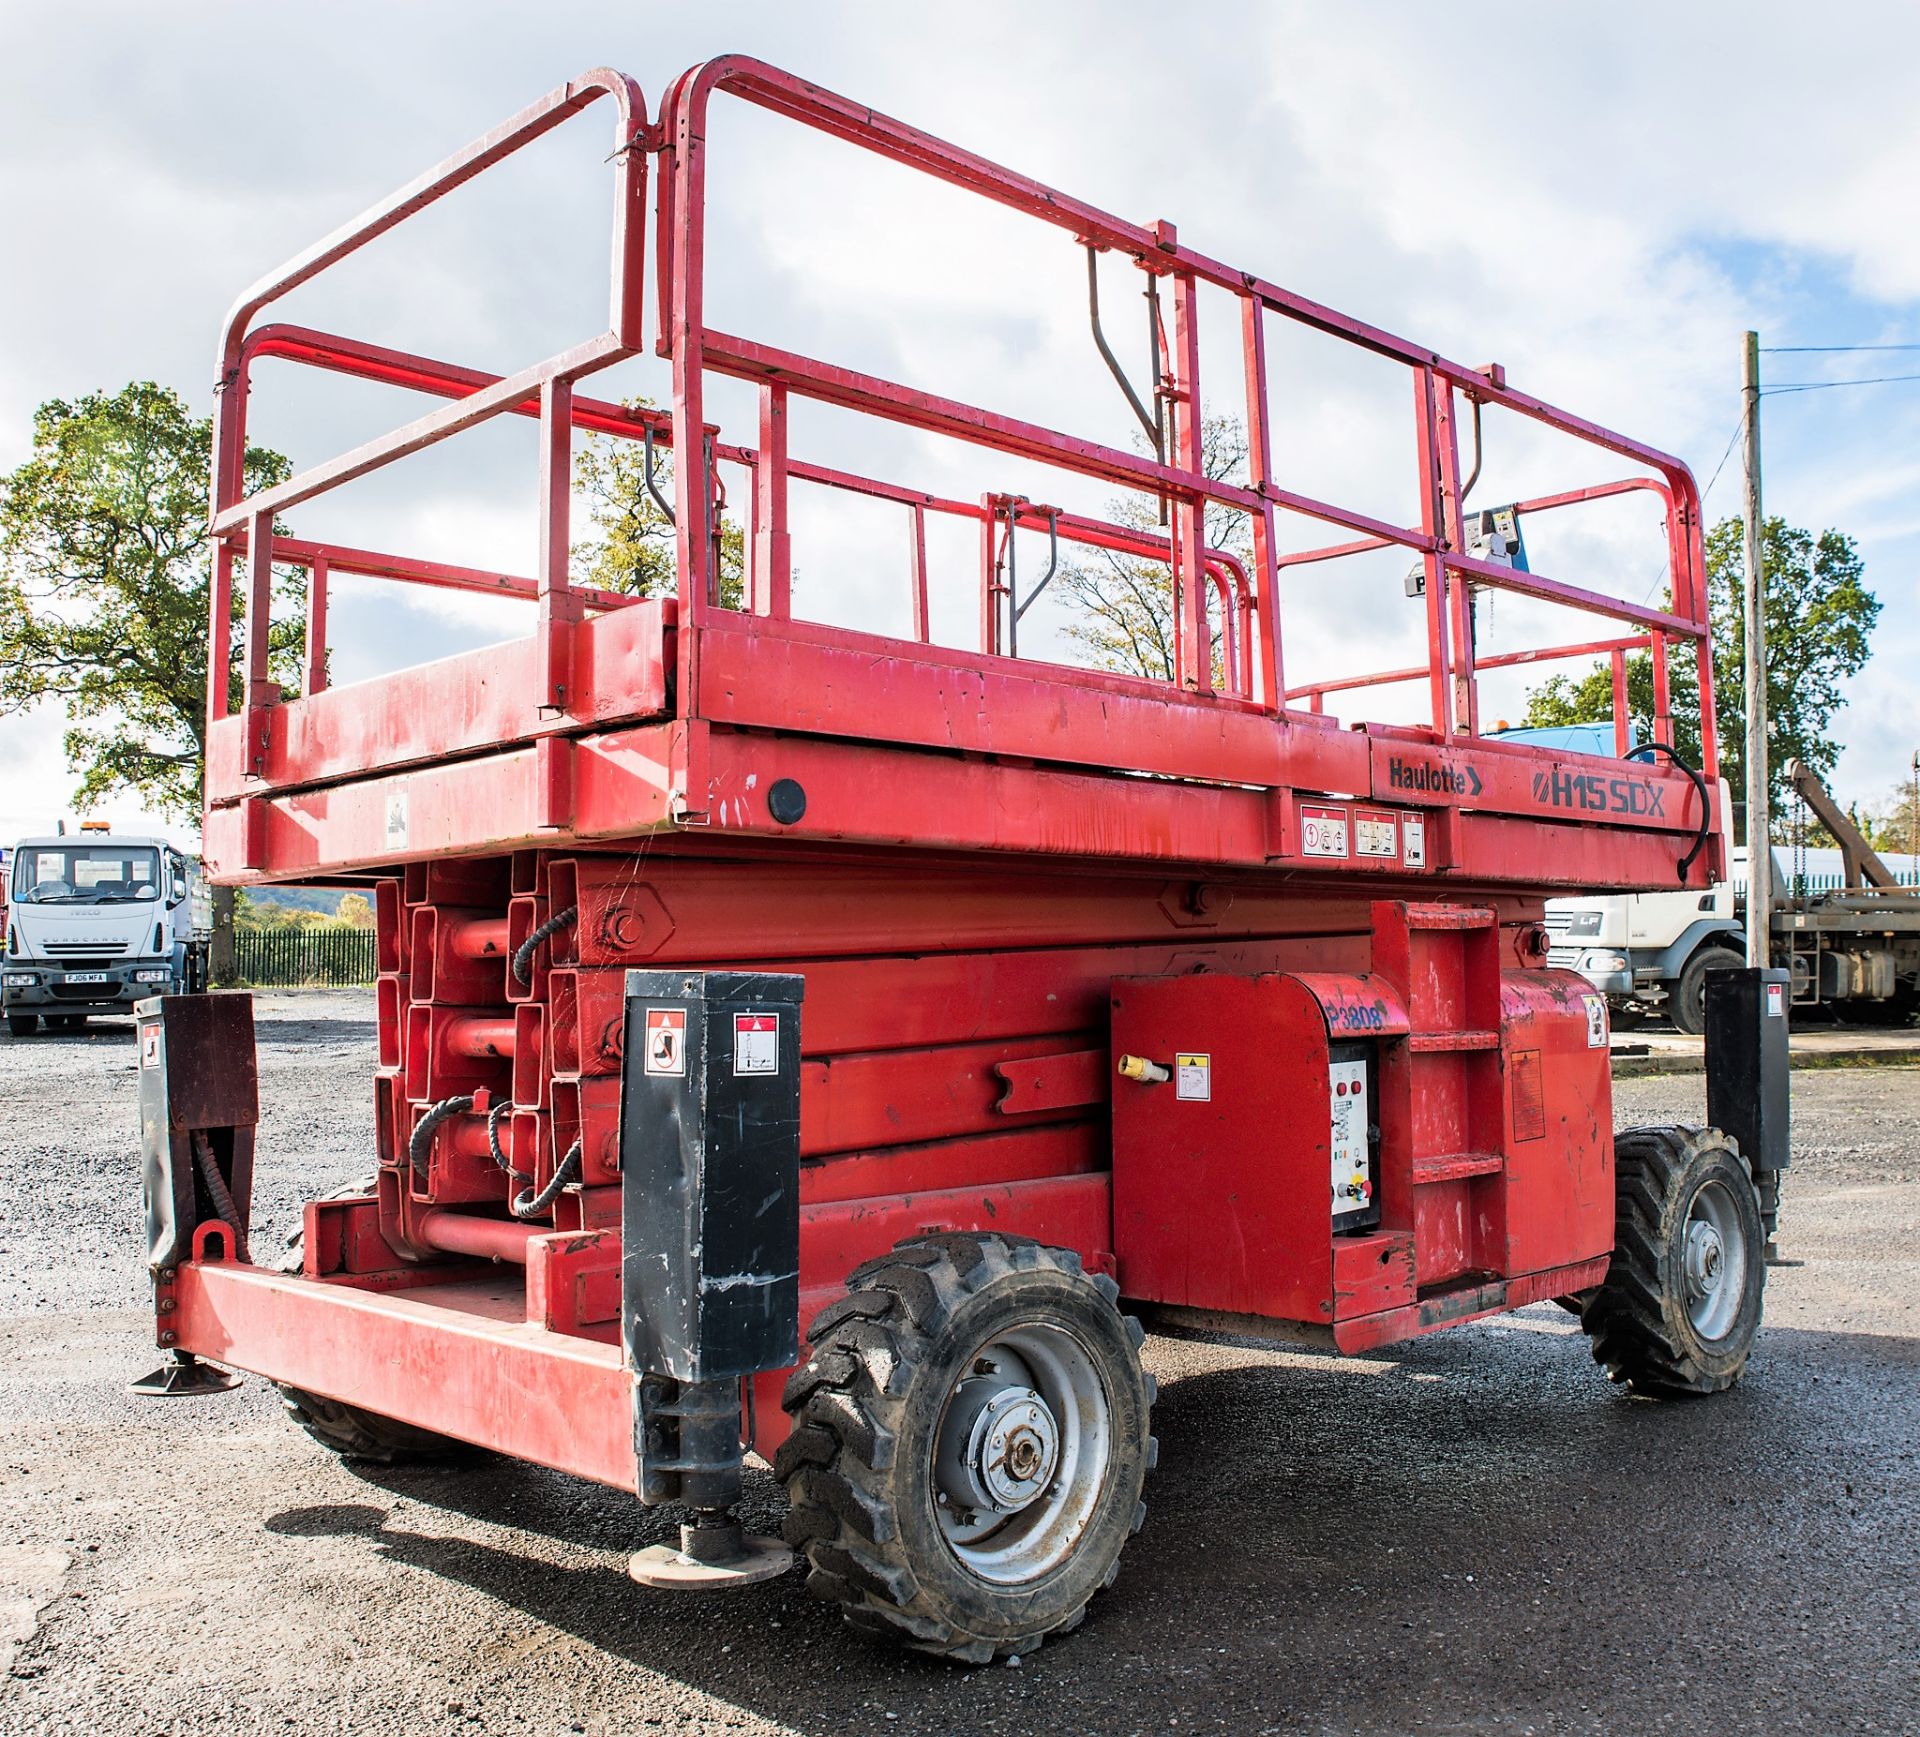 Haulotte H15SX diesel driven scissor lift access platform Year: 2003 S/N: 104436 Recorded Hours: 527 - Image 3 of 10